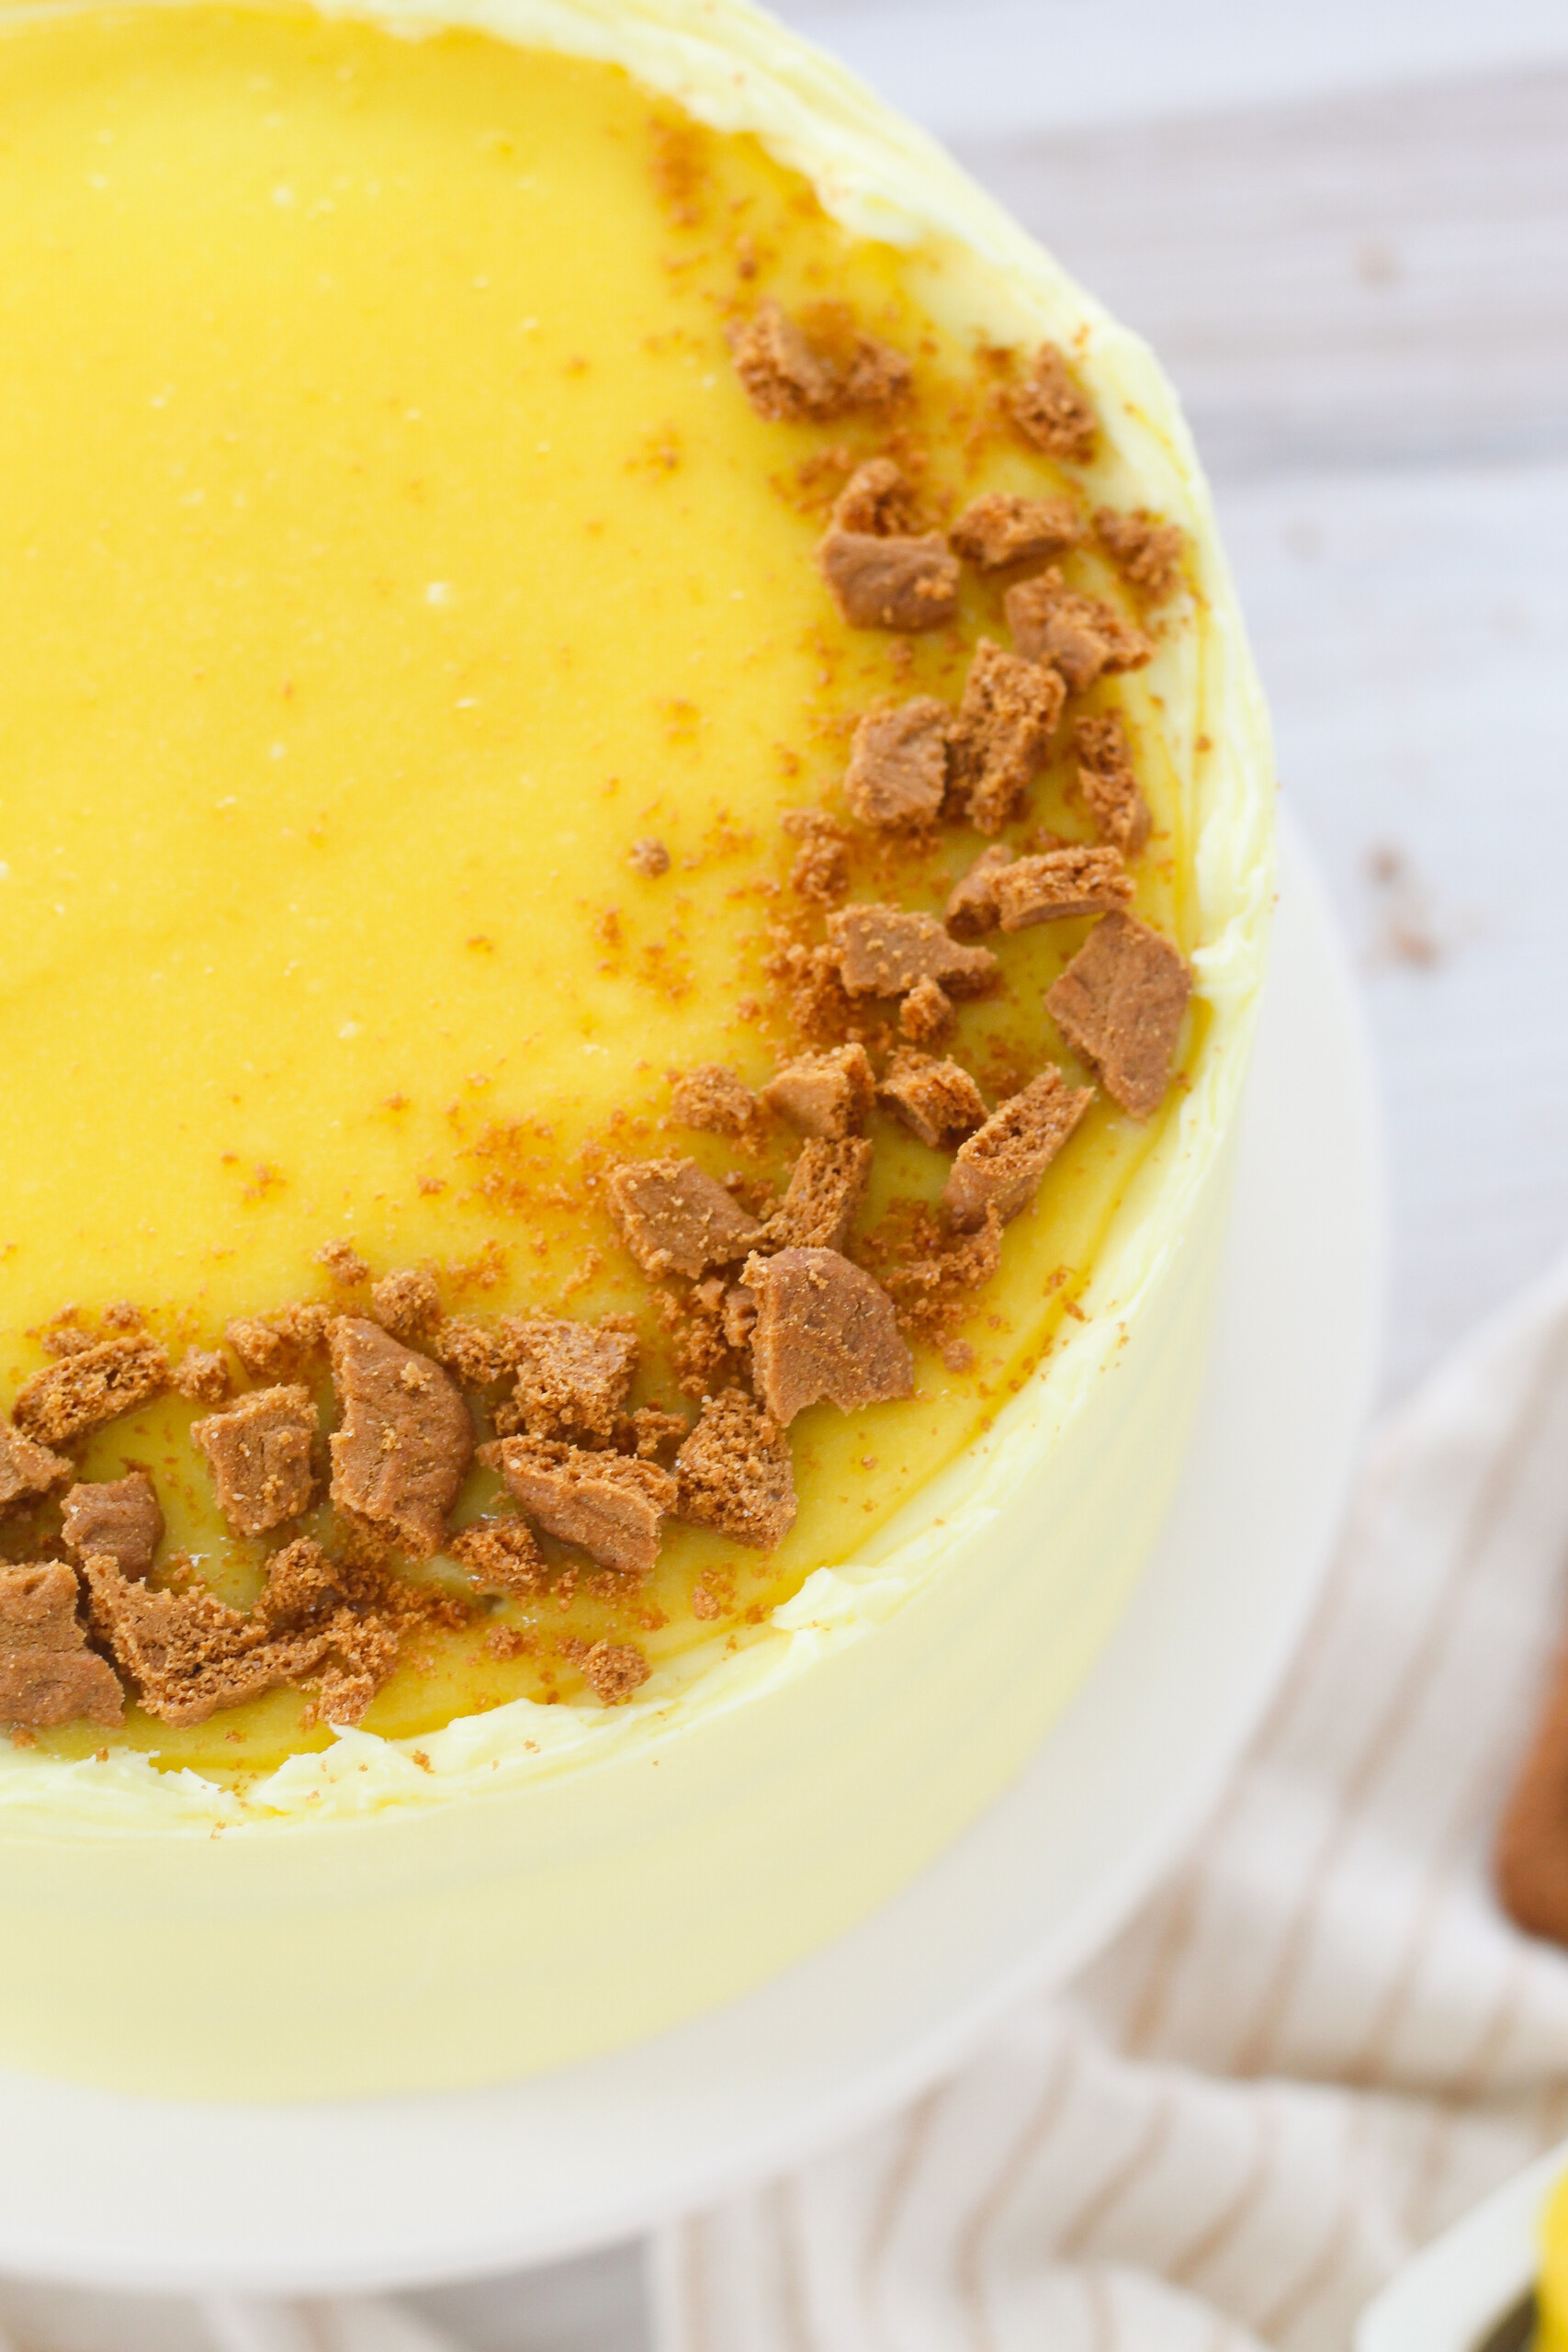 Lemon curd on a cake with Biscoff cookies.